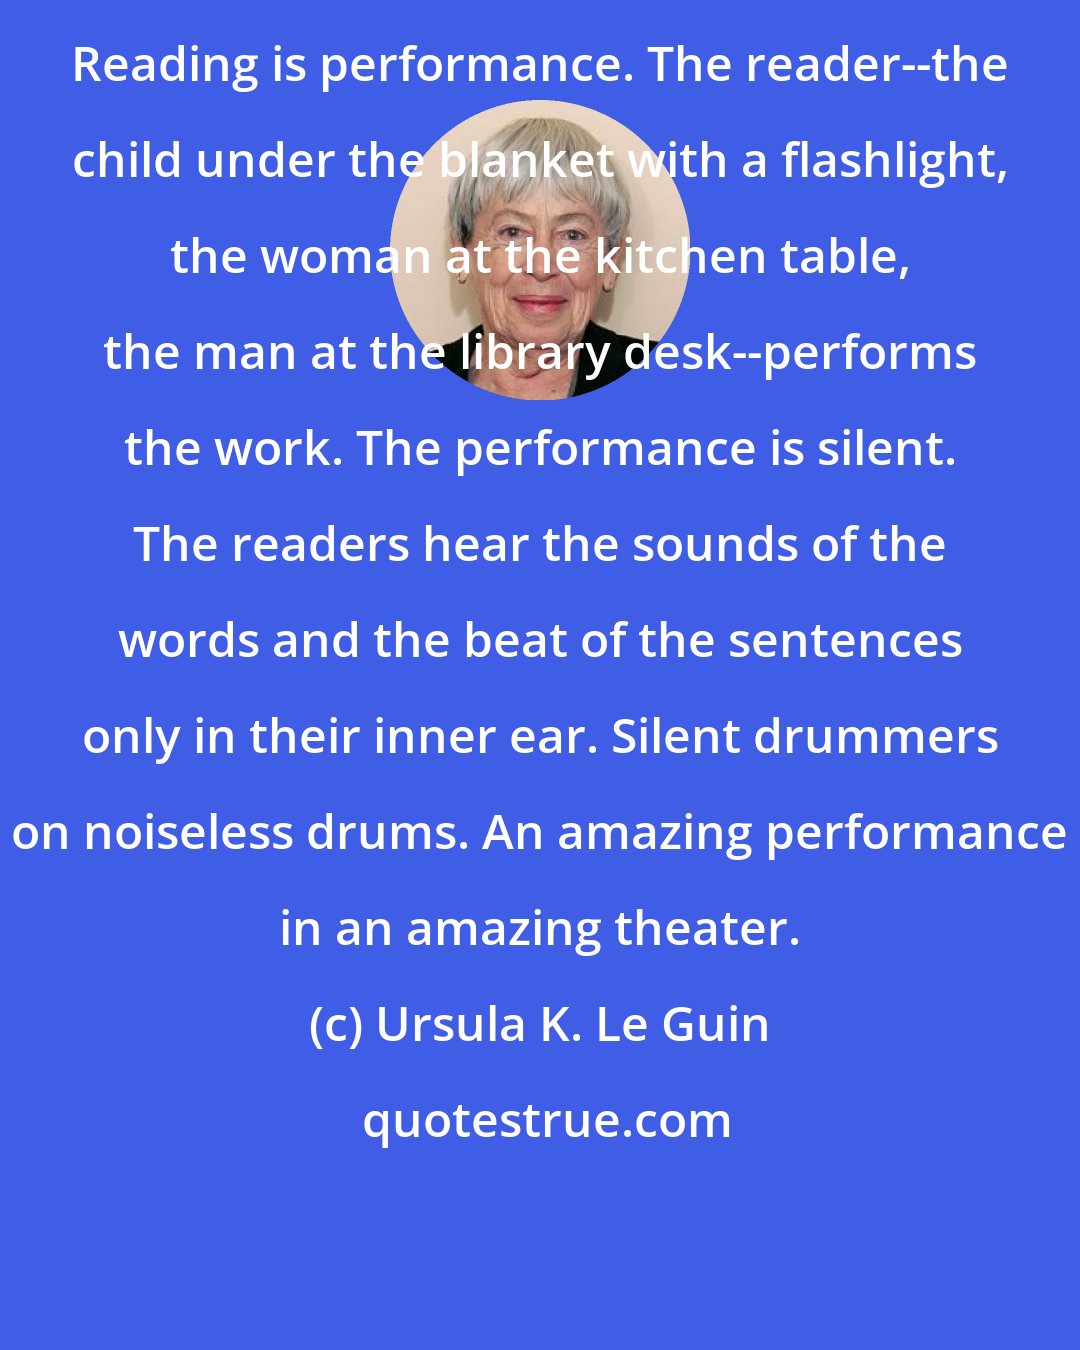 Ursula K. Le Guin: Reading is performance. The reader--the child under the blanket with a flashlight, the woman at the kitchen table, the man at the library desk--performs the work. The performance is silent. The readers hear the sounds of the words and the beat of the sentences only in their inner ear. Silent drummers on noiseless drums. An amazing performance in an amazing theater.